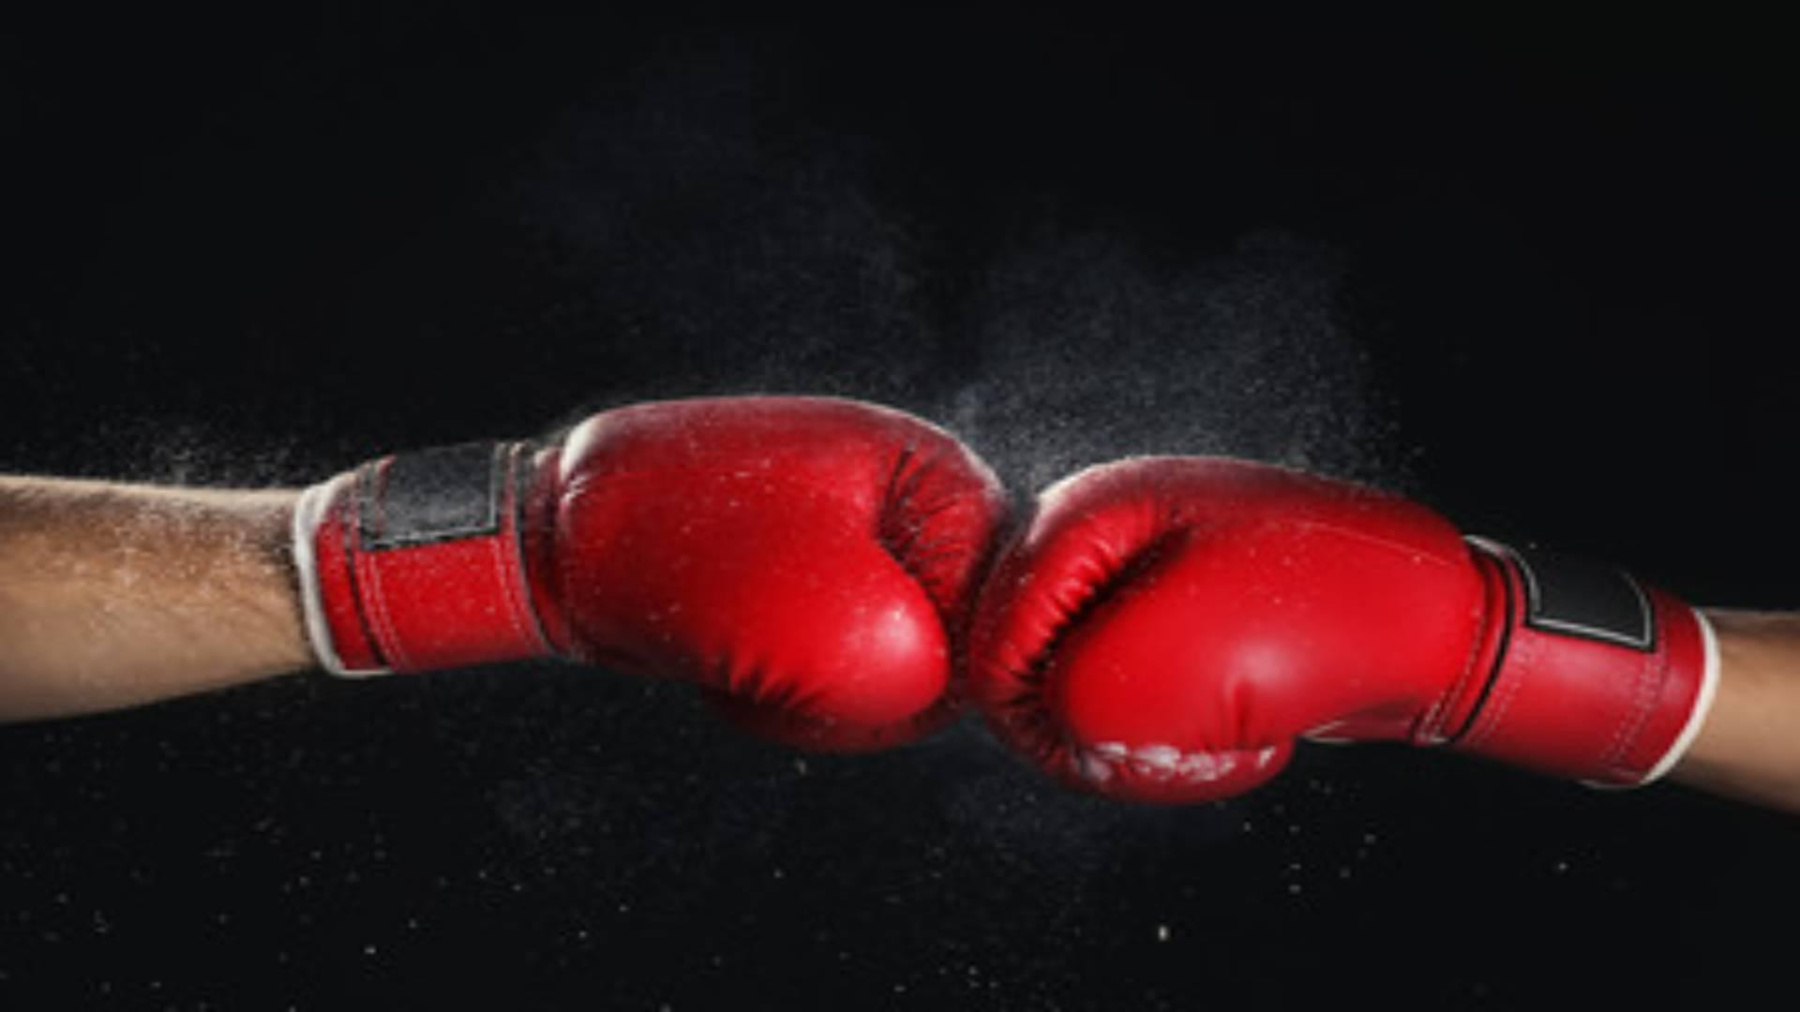 Attend a free boxing match at Westfield Forum des Halles